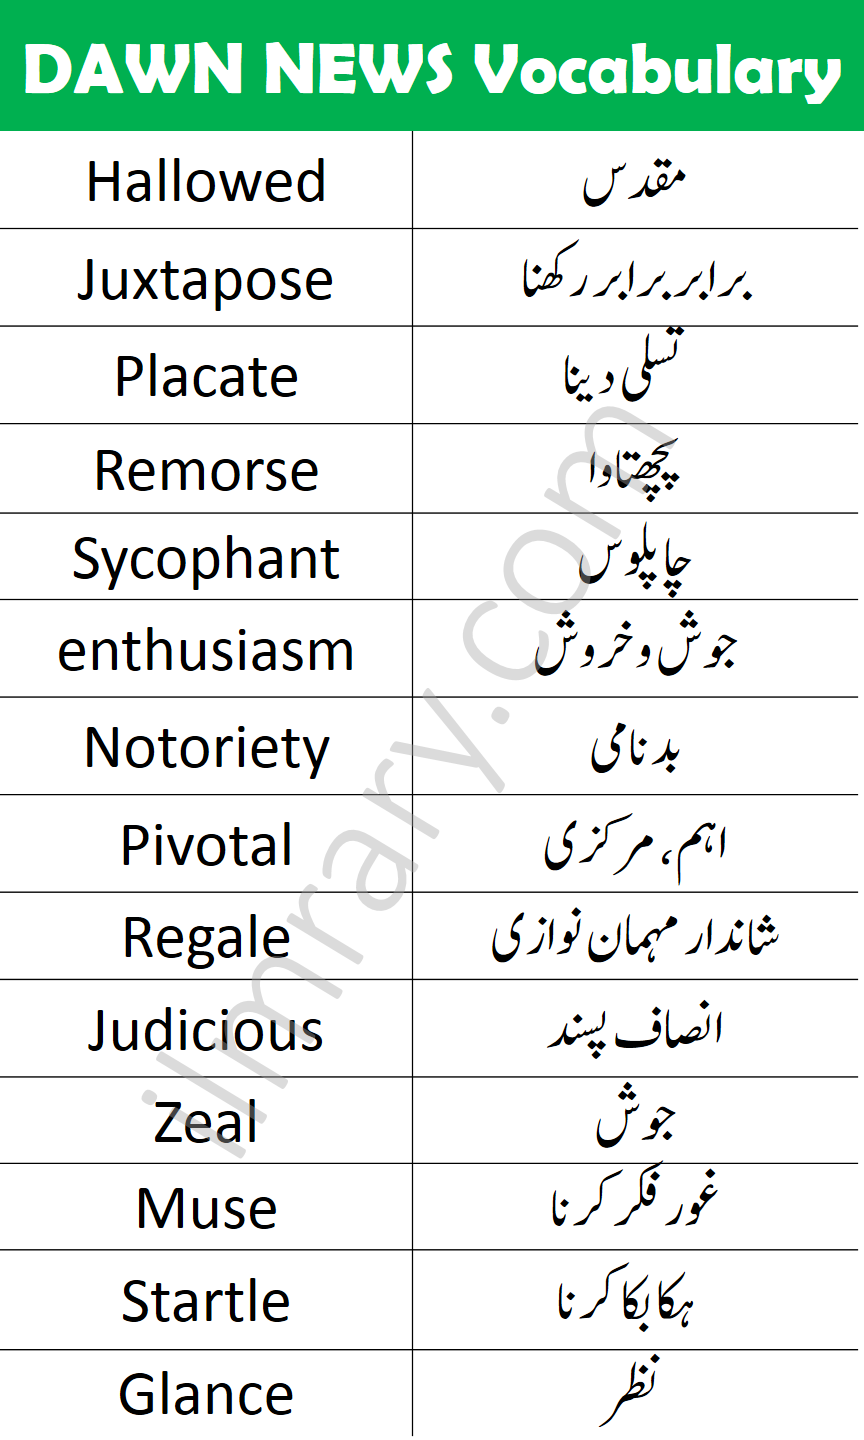 500 Dawn Newspaper Vocabulary Words with Urdu Meanings